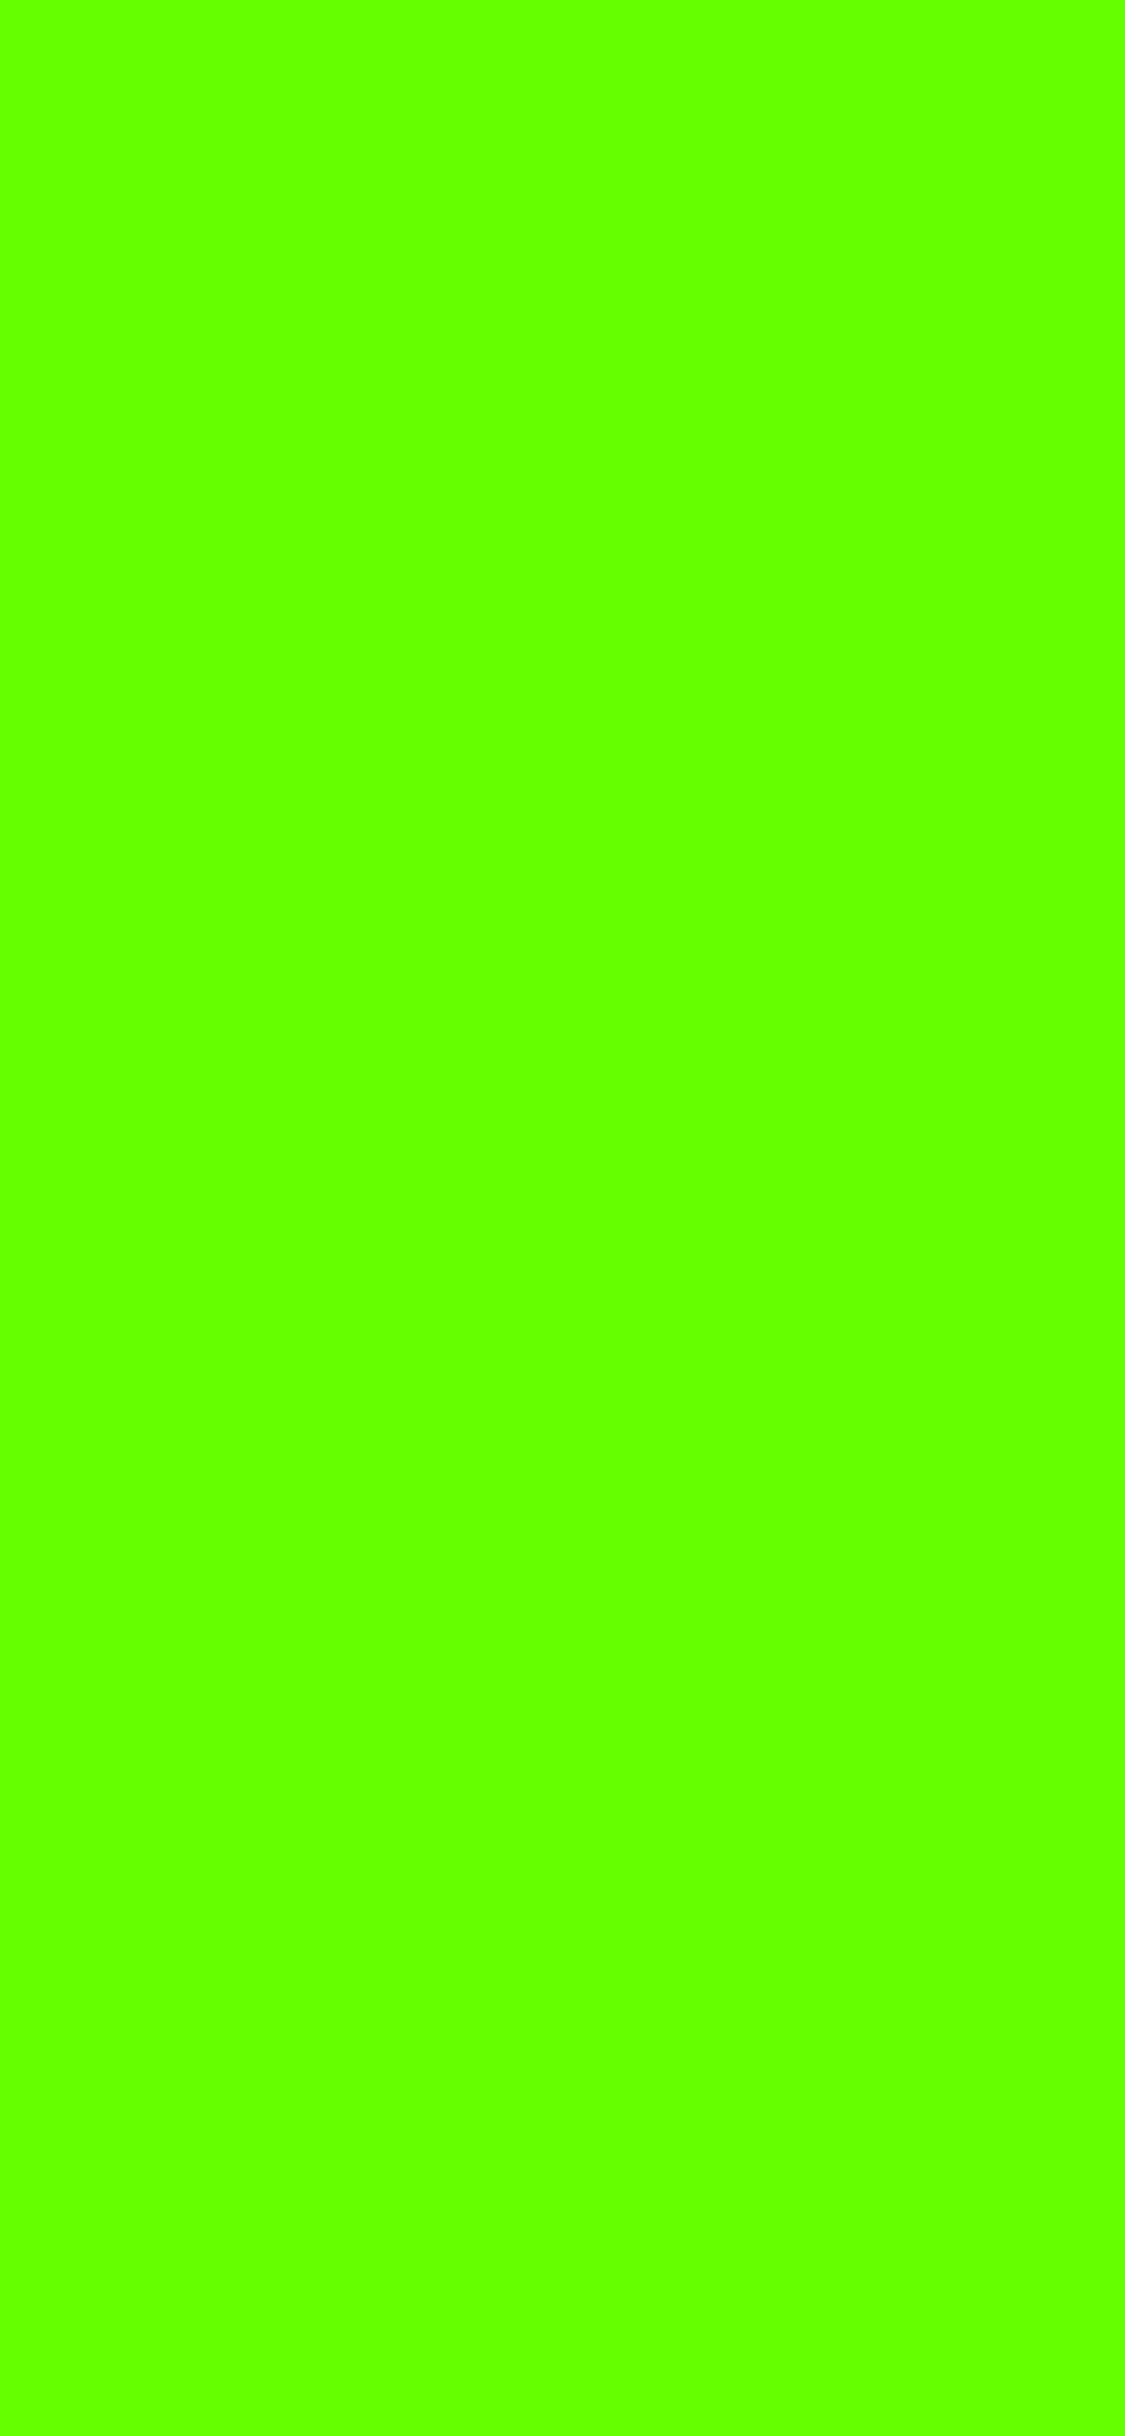 91 Green Solid Color Backgrounds ideas  solid color backgrounds, solid  color, color